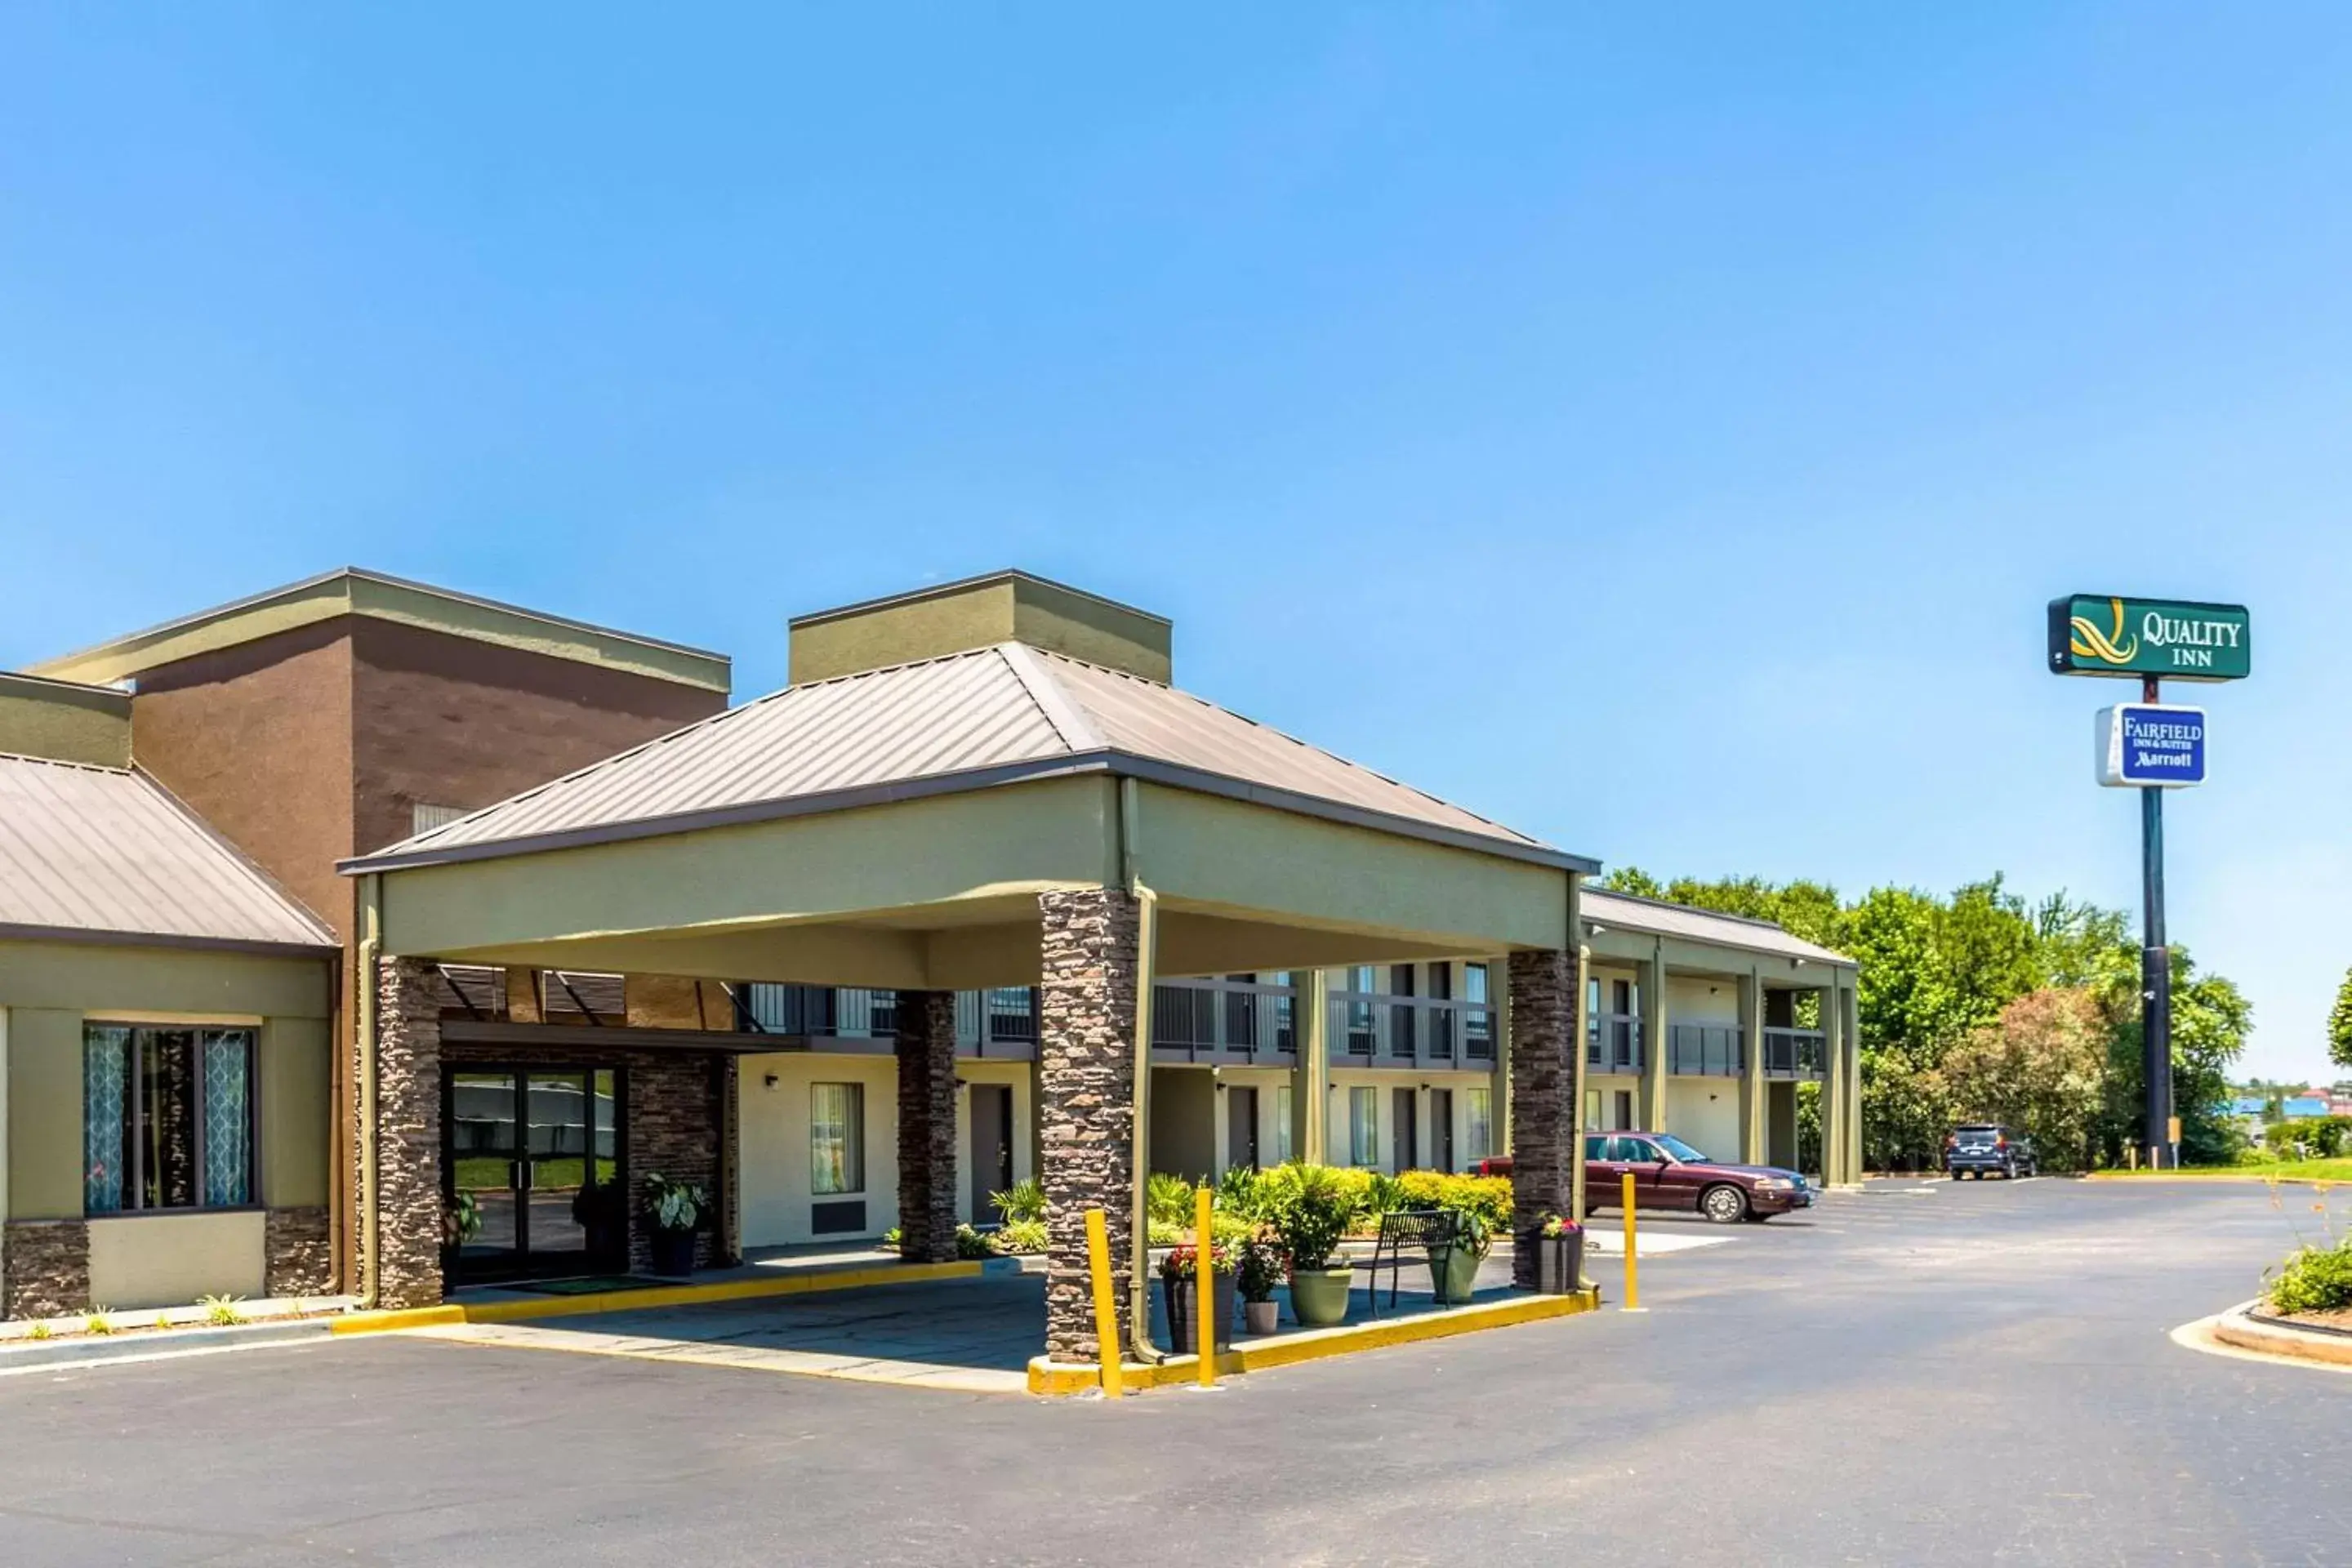 Property Building in Quality Inn Simpsonville-Greenville